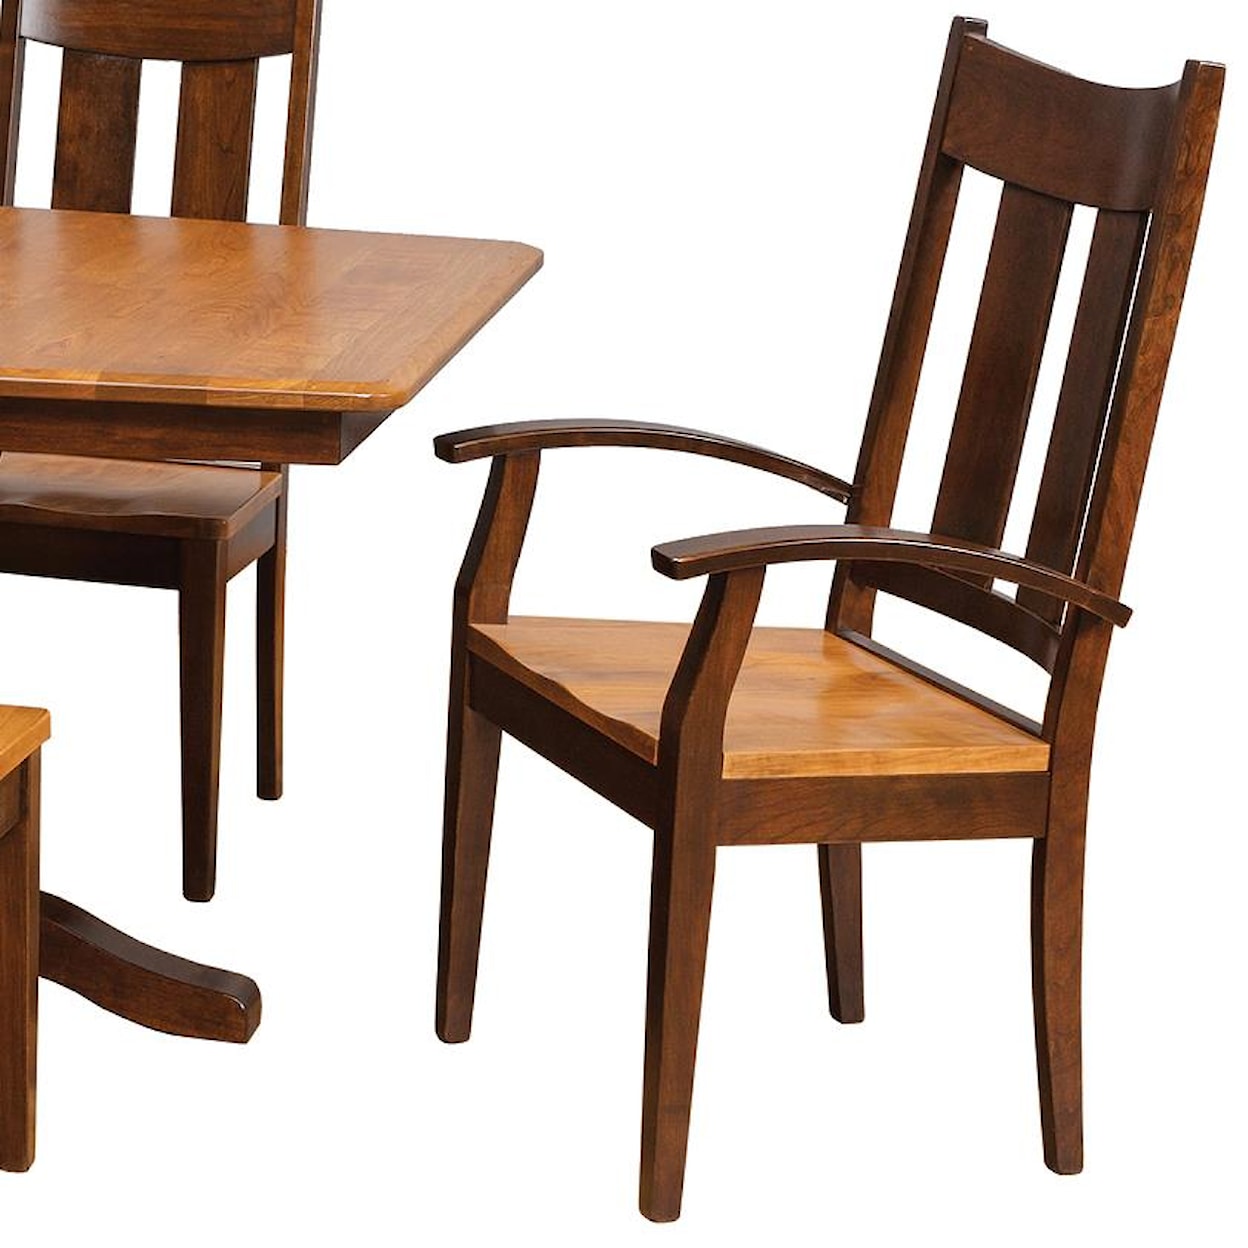 Daniels Amish Chairs and Barstools Tampa Arm Chair